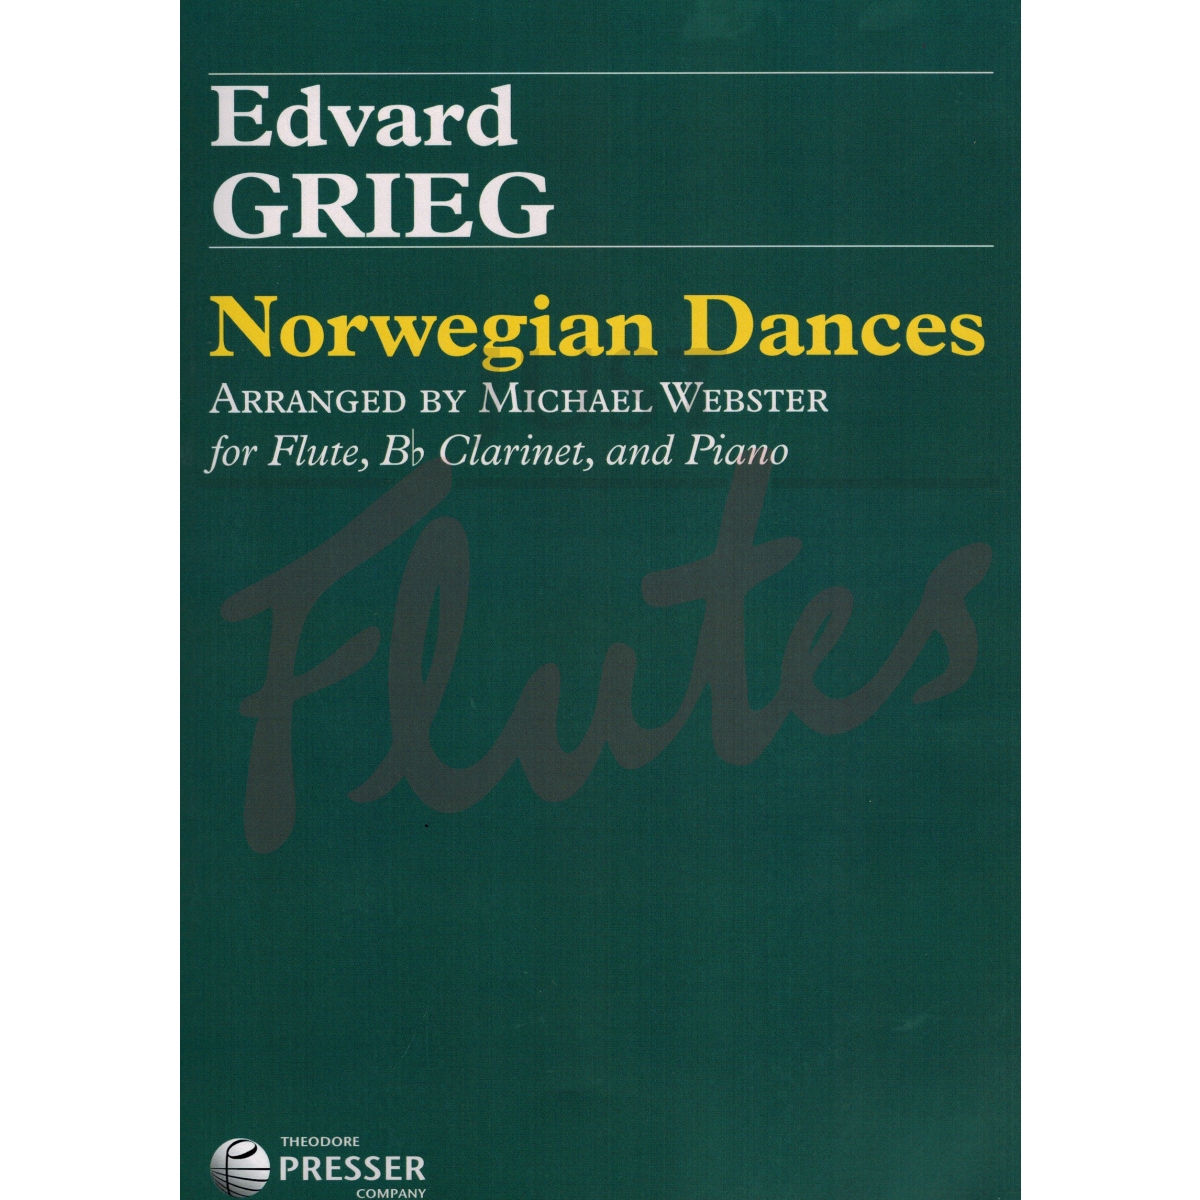 Norwegian Dances arranged for Flute, Clarinet and Piano